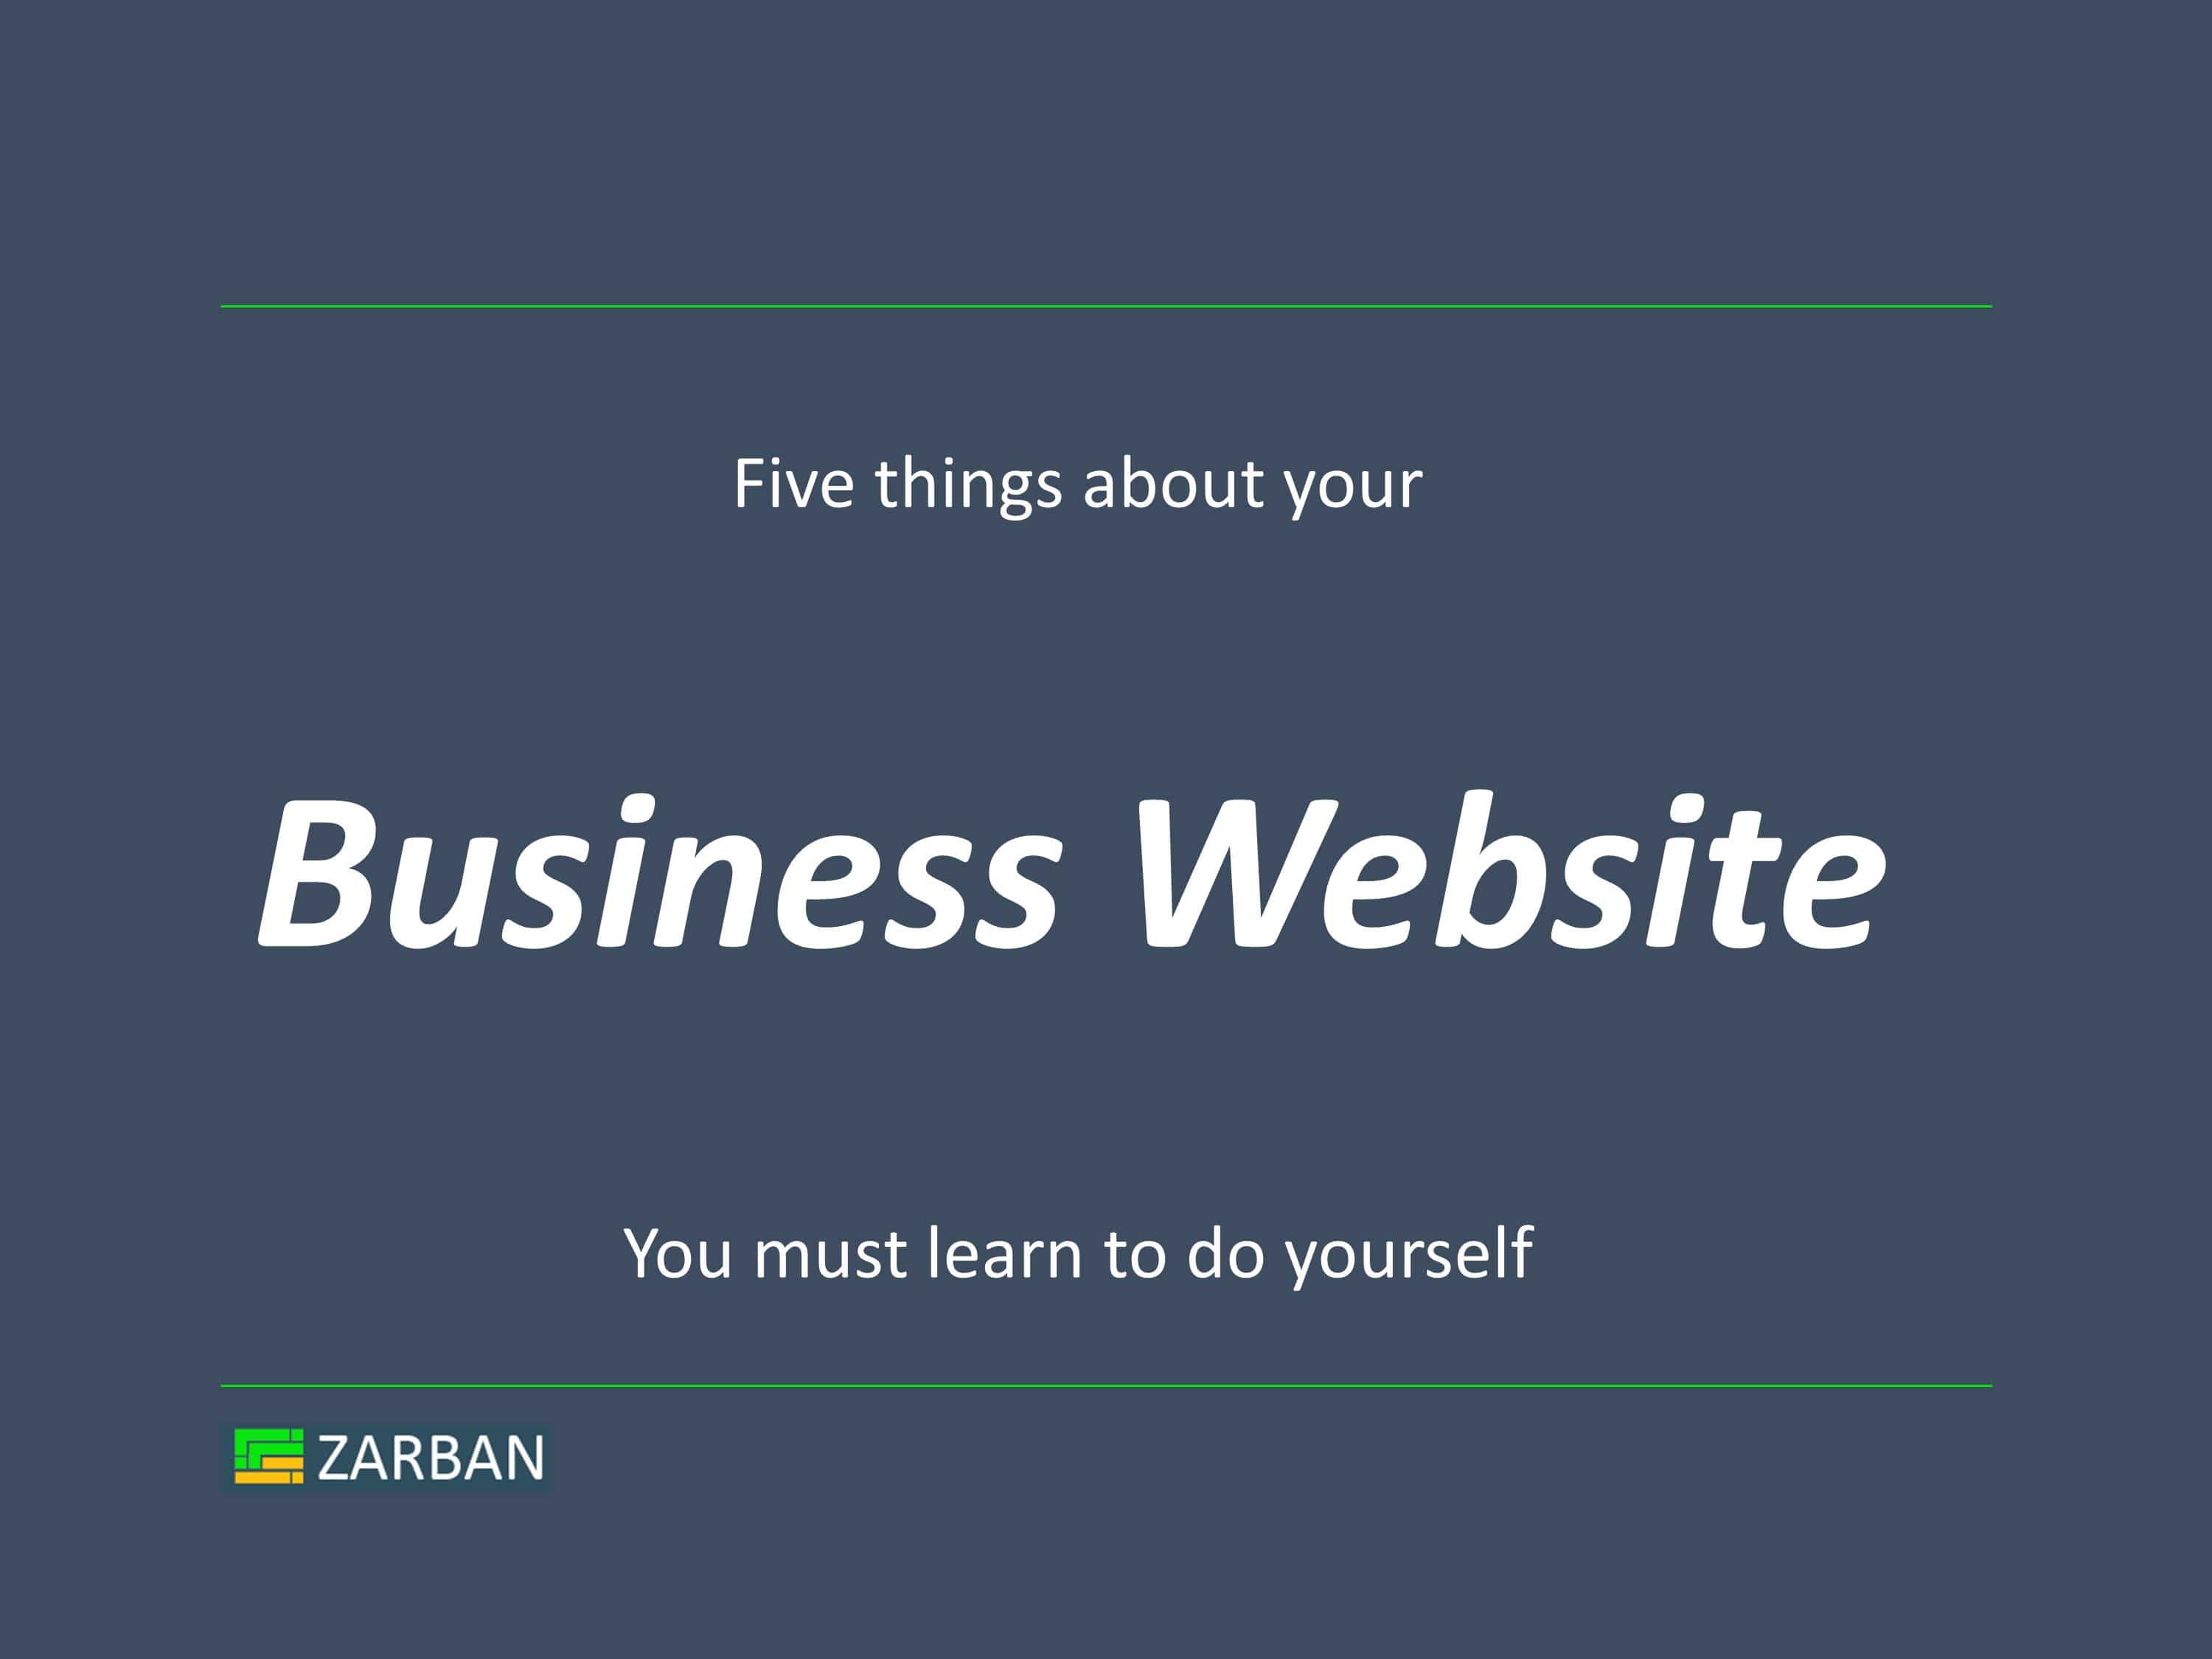 Five things you must do for your business website